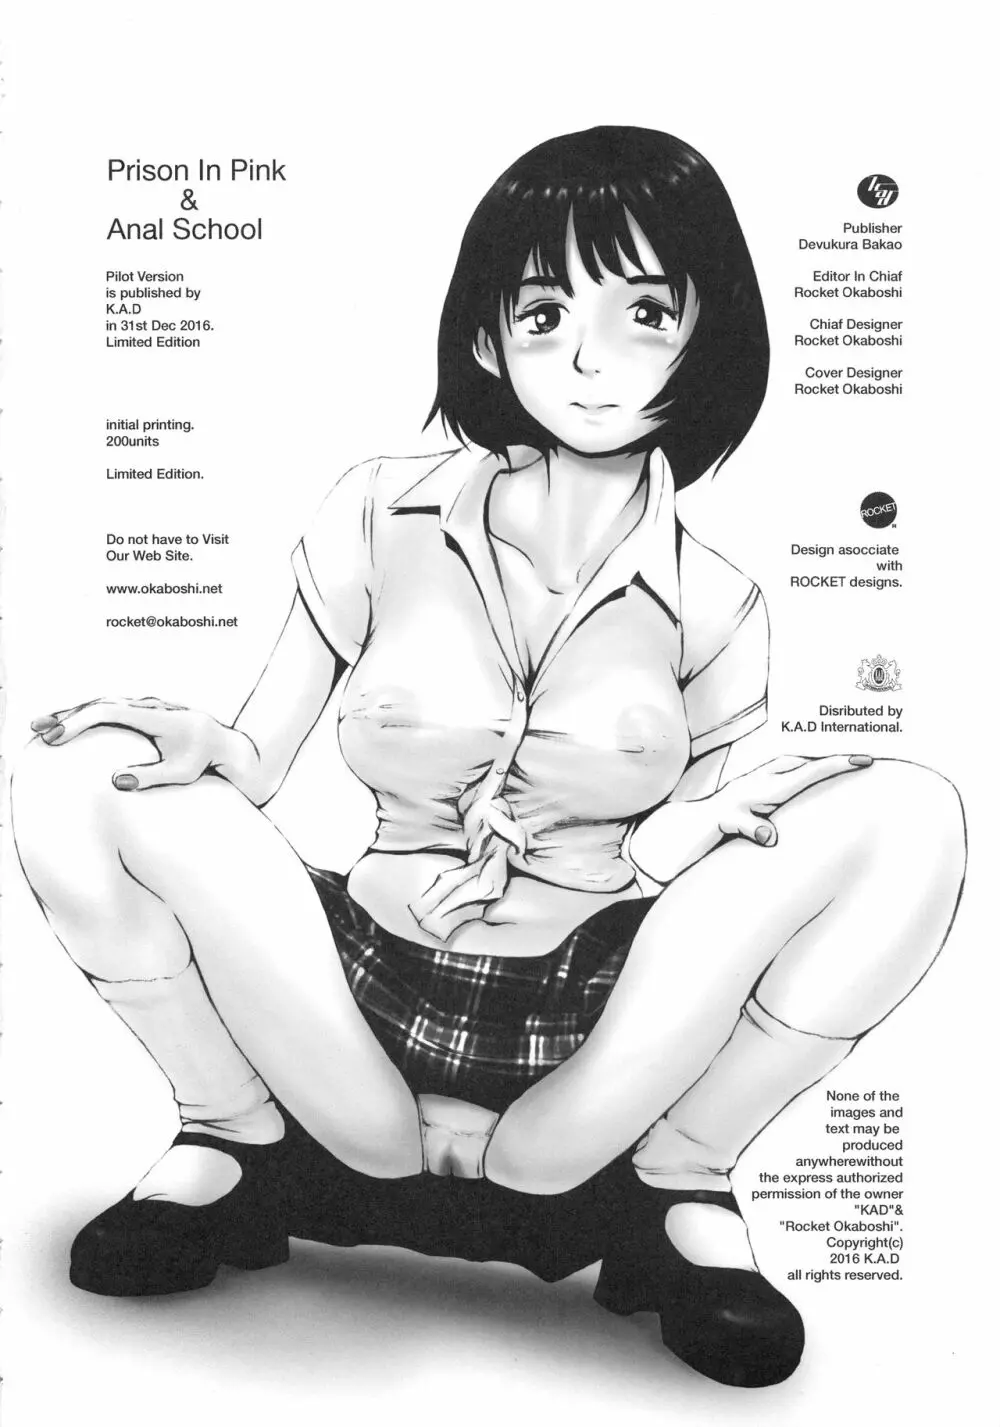 Prison In Pink&Anal School 33ページ